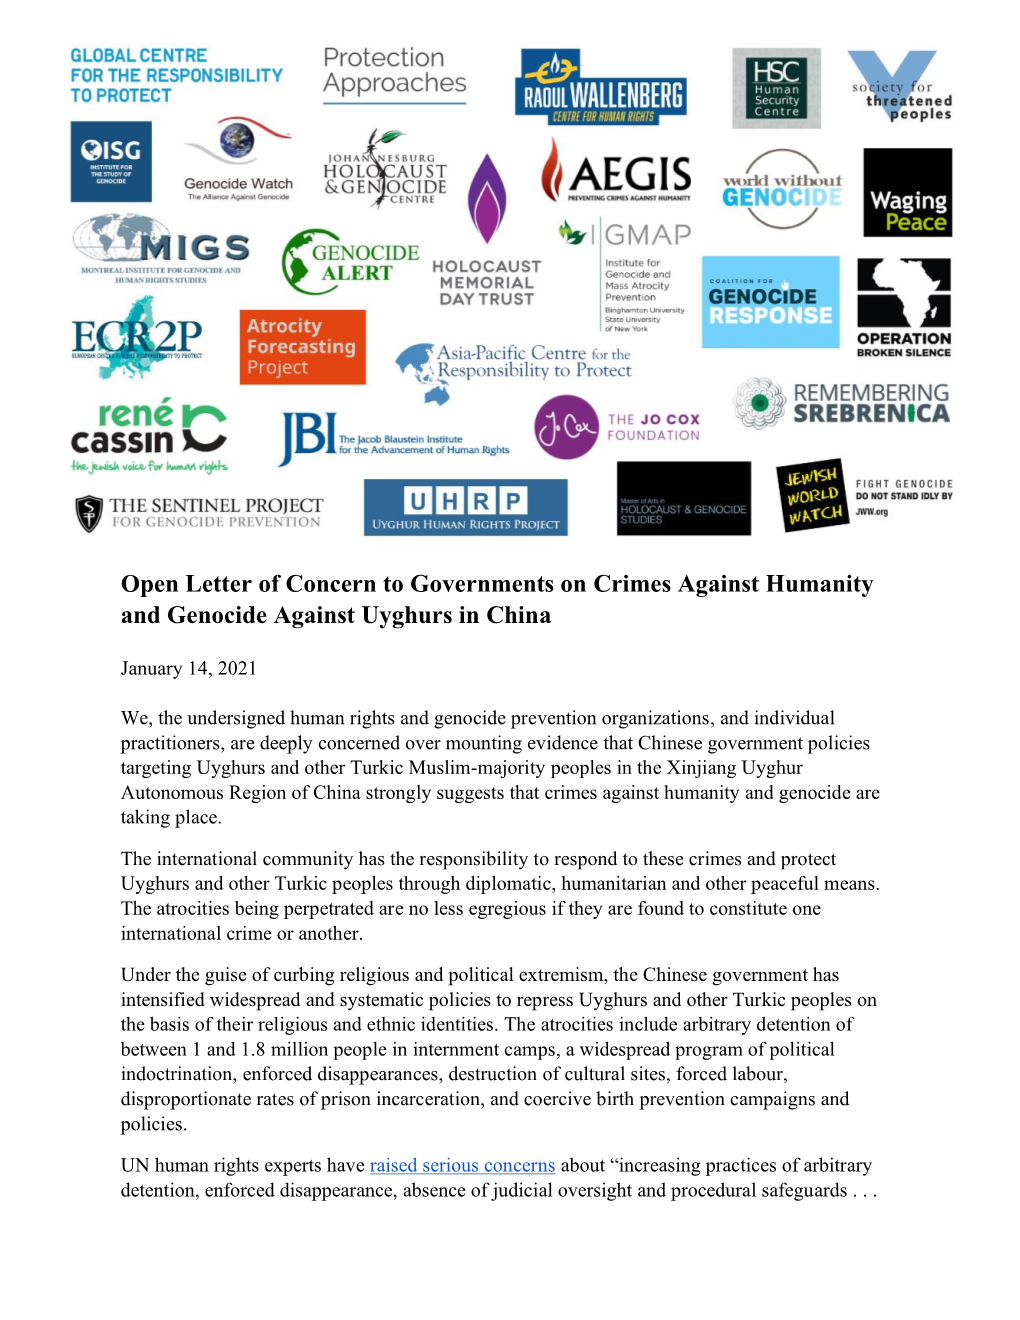 Open Letter of Concern to Governments on Crimes Against Humanity and Genocide Against Uyghurs in China